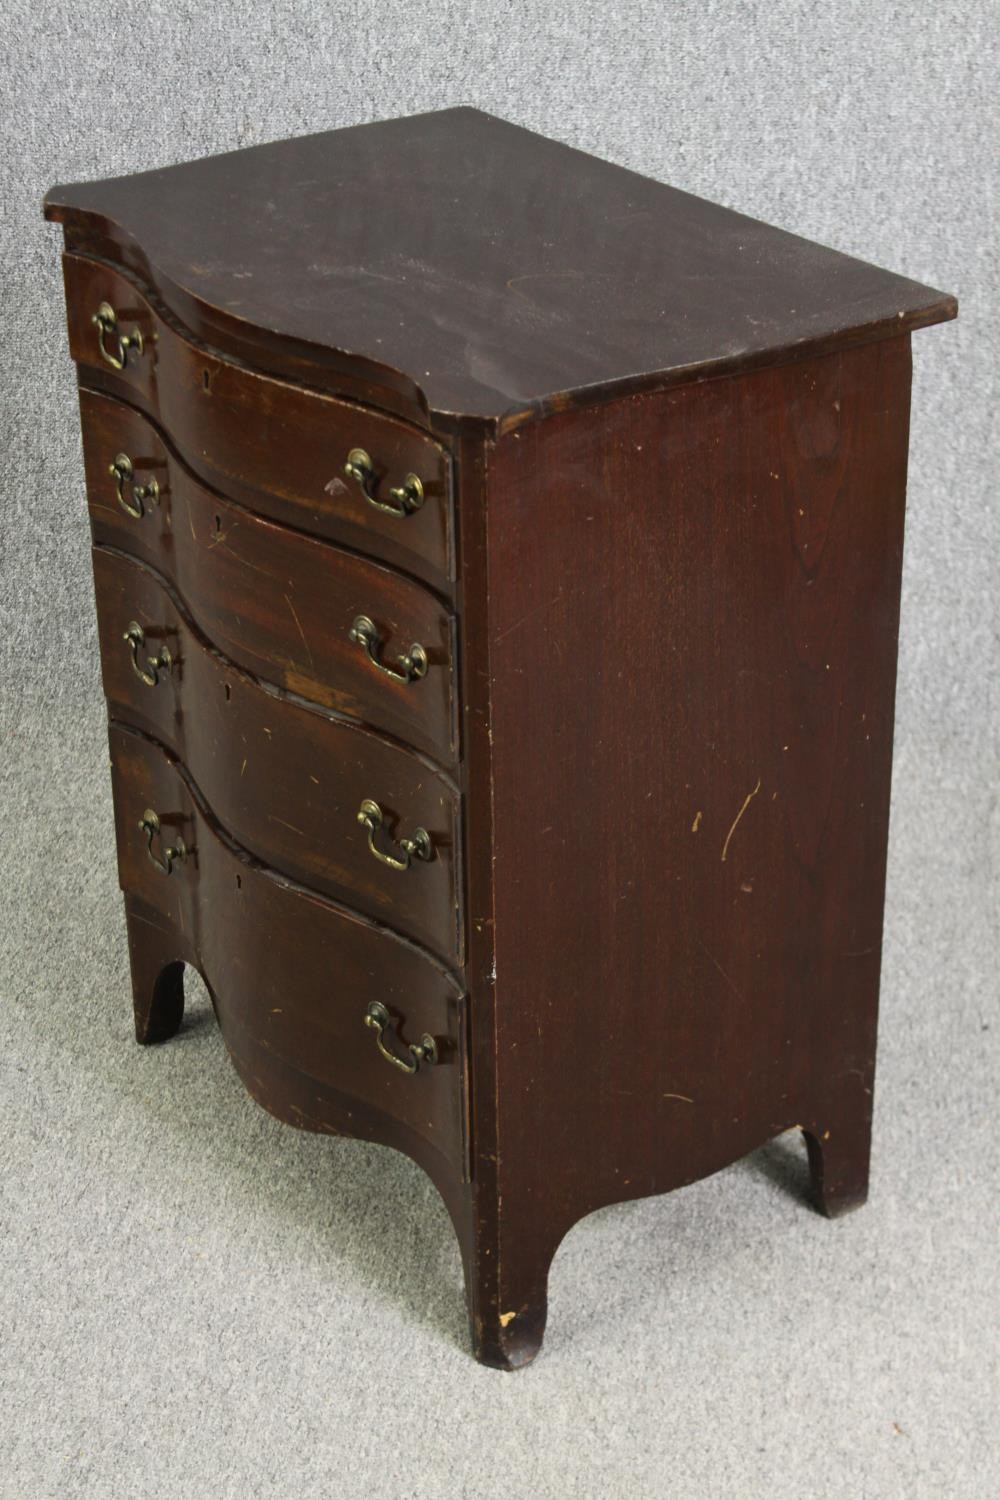 A small George III style mahogany chest of drawers, early 20th century. H.74 W.59 D.41cm. - Image 3 of 5